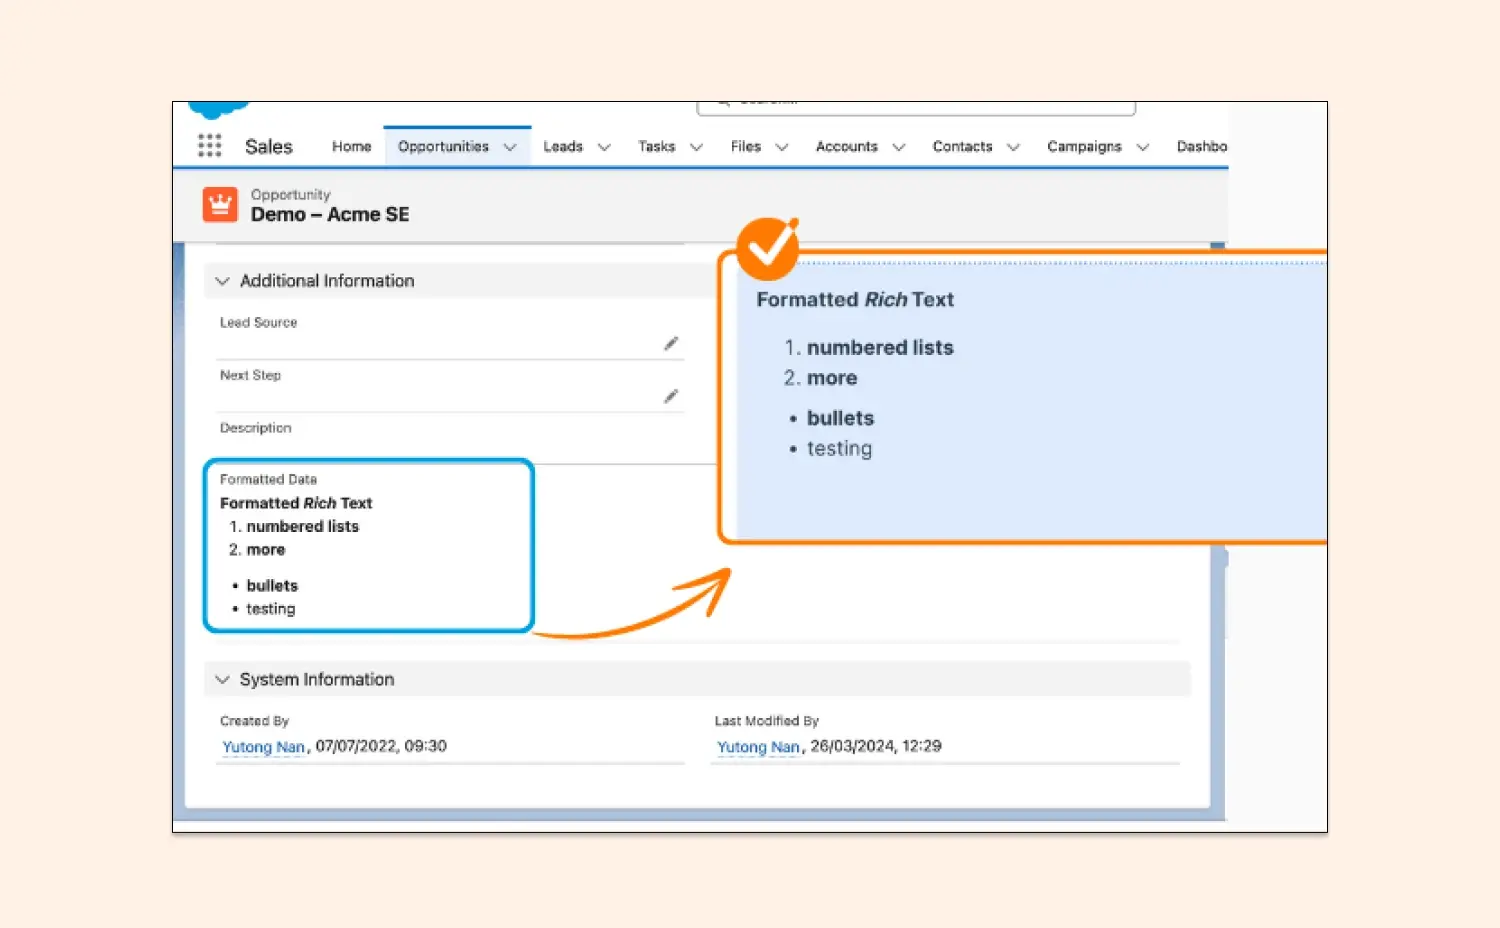 Effortlessly push rich text from Salesforce into GetAccept documents